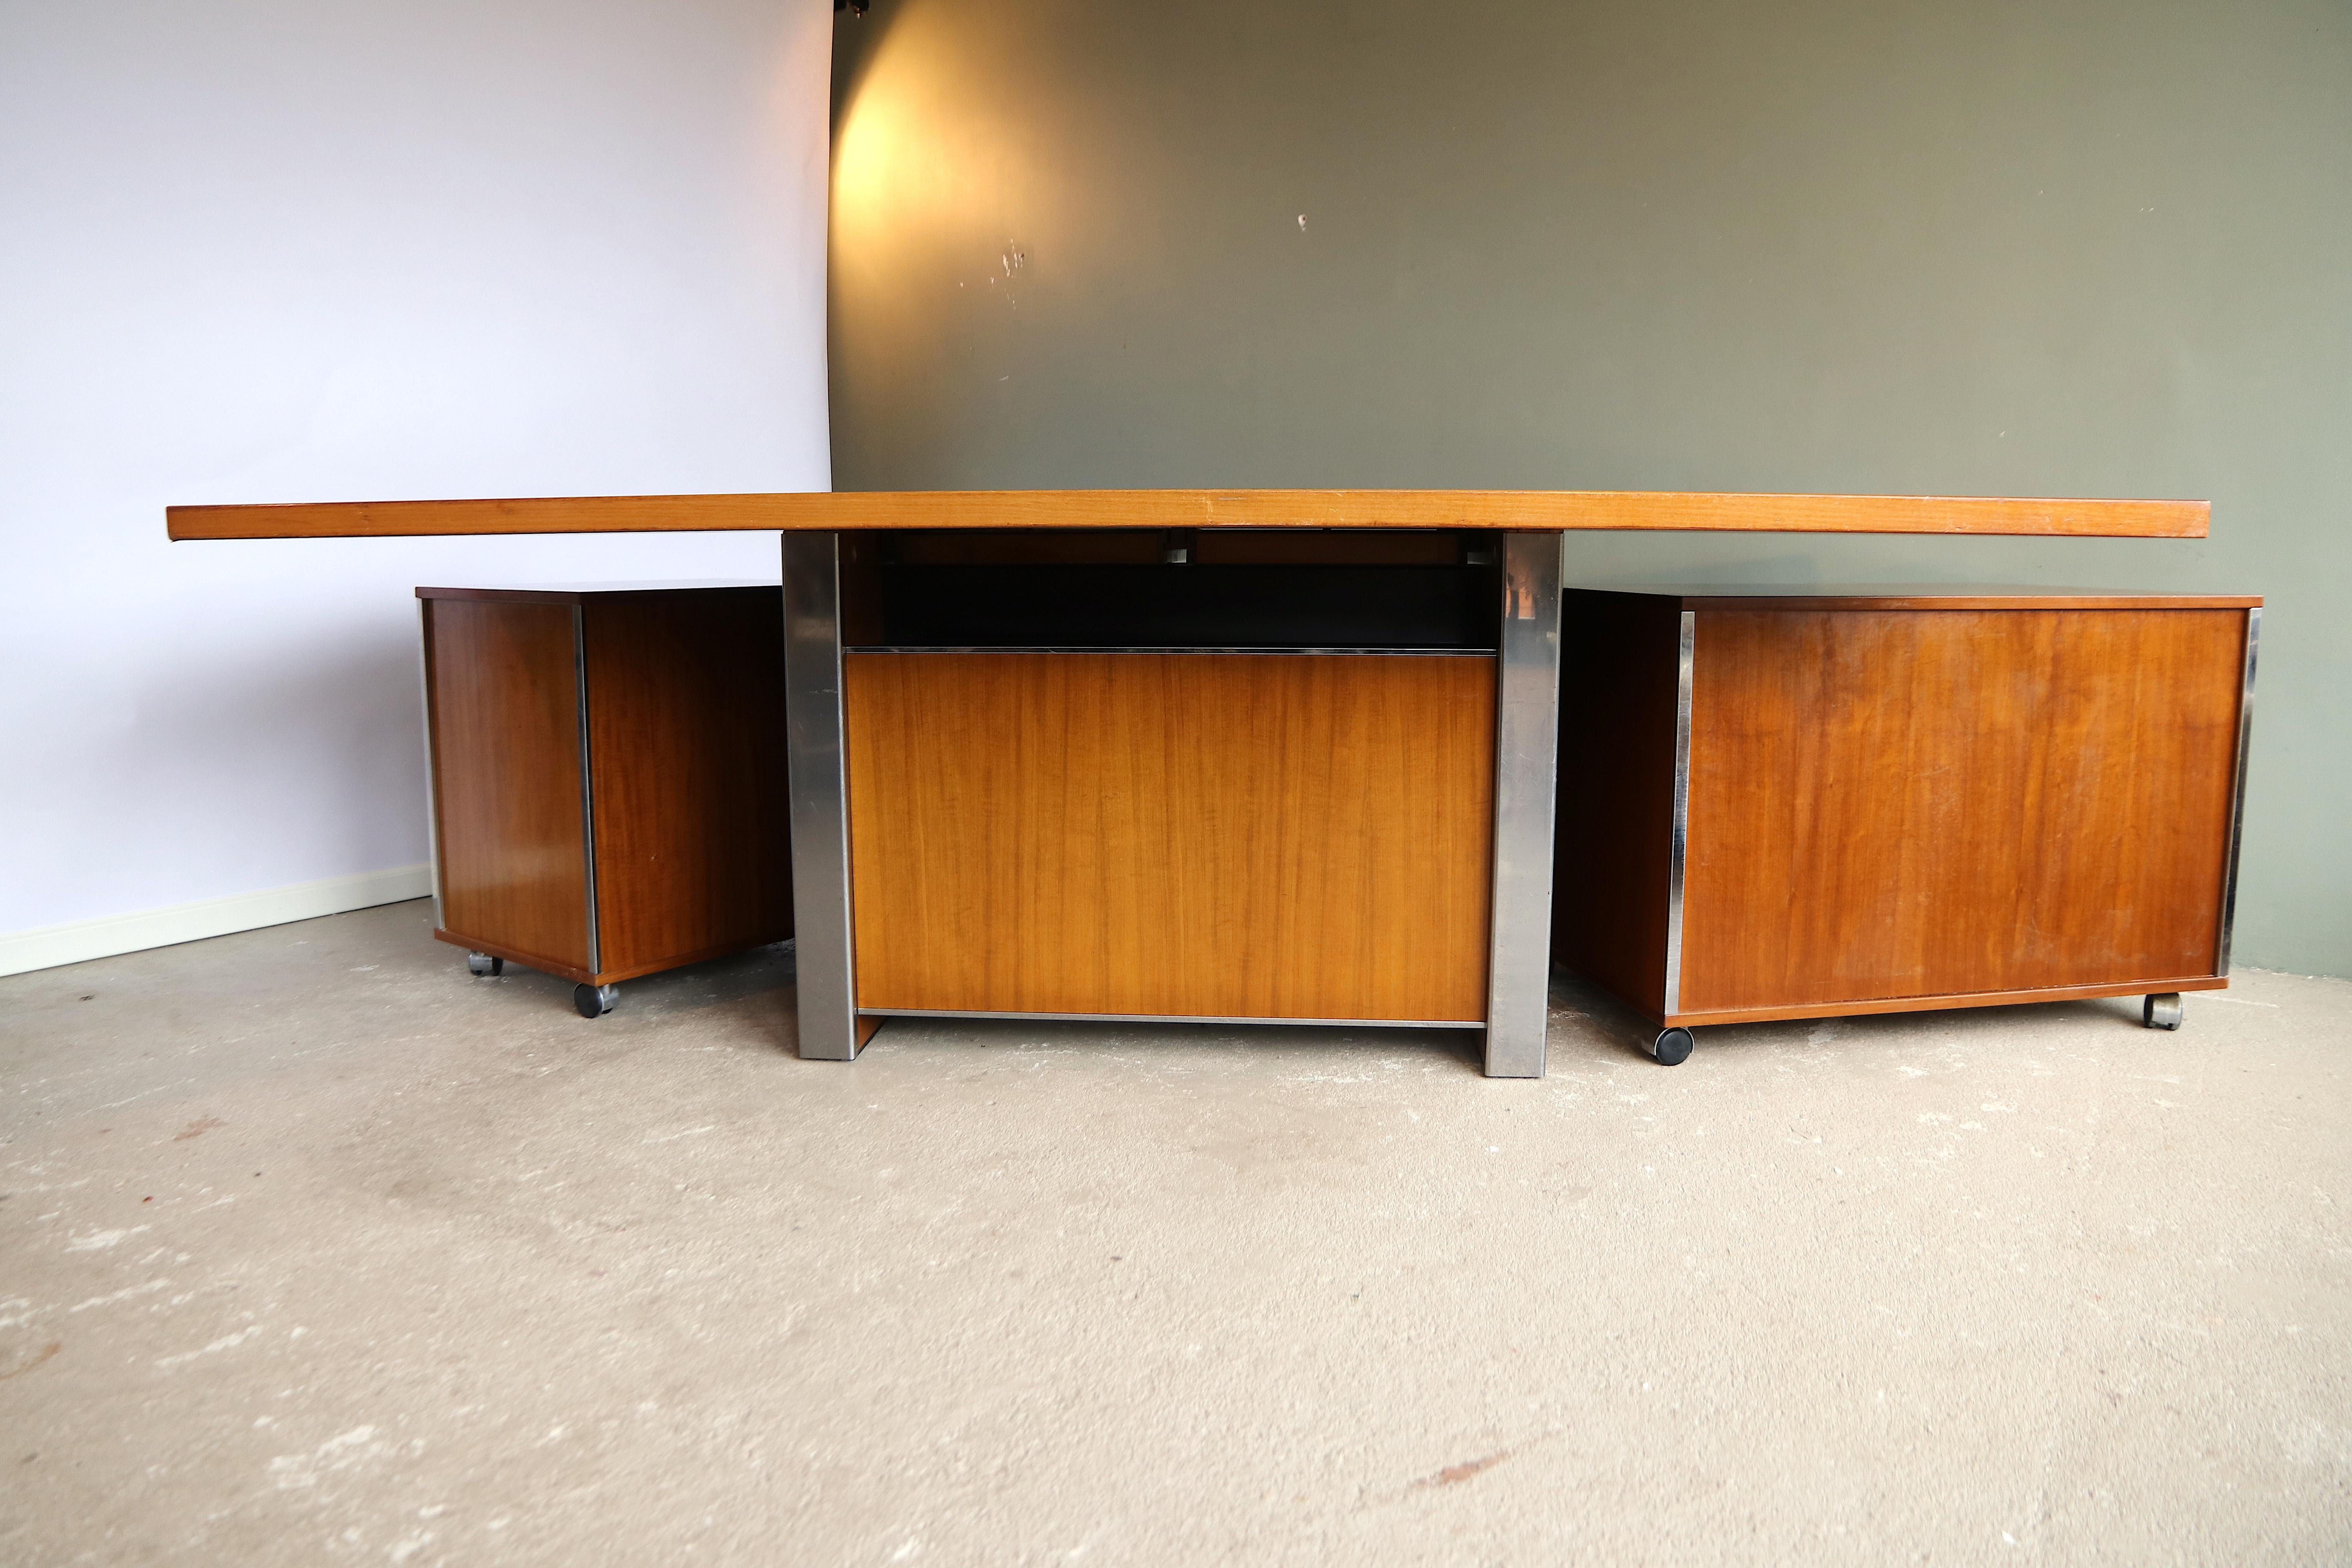 This is the very rare top of the line version of the executive corner desk in the style of Ico Parisi for MiM Roma, complete with all the optional modular accessories that were possible to order, such as the movable drawer cabinet on the right side